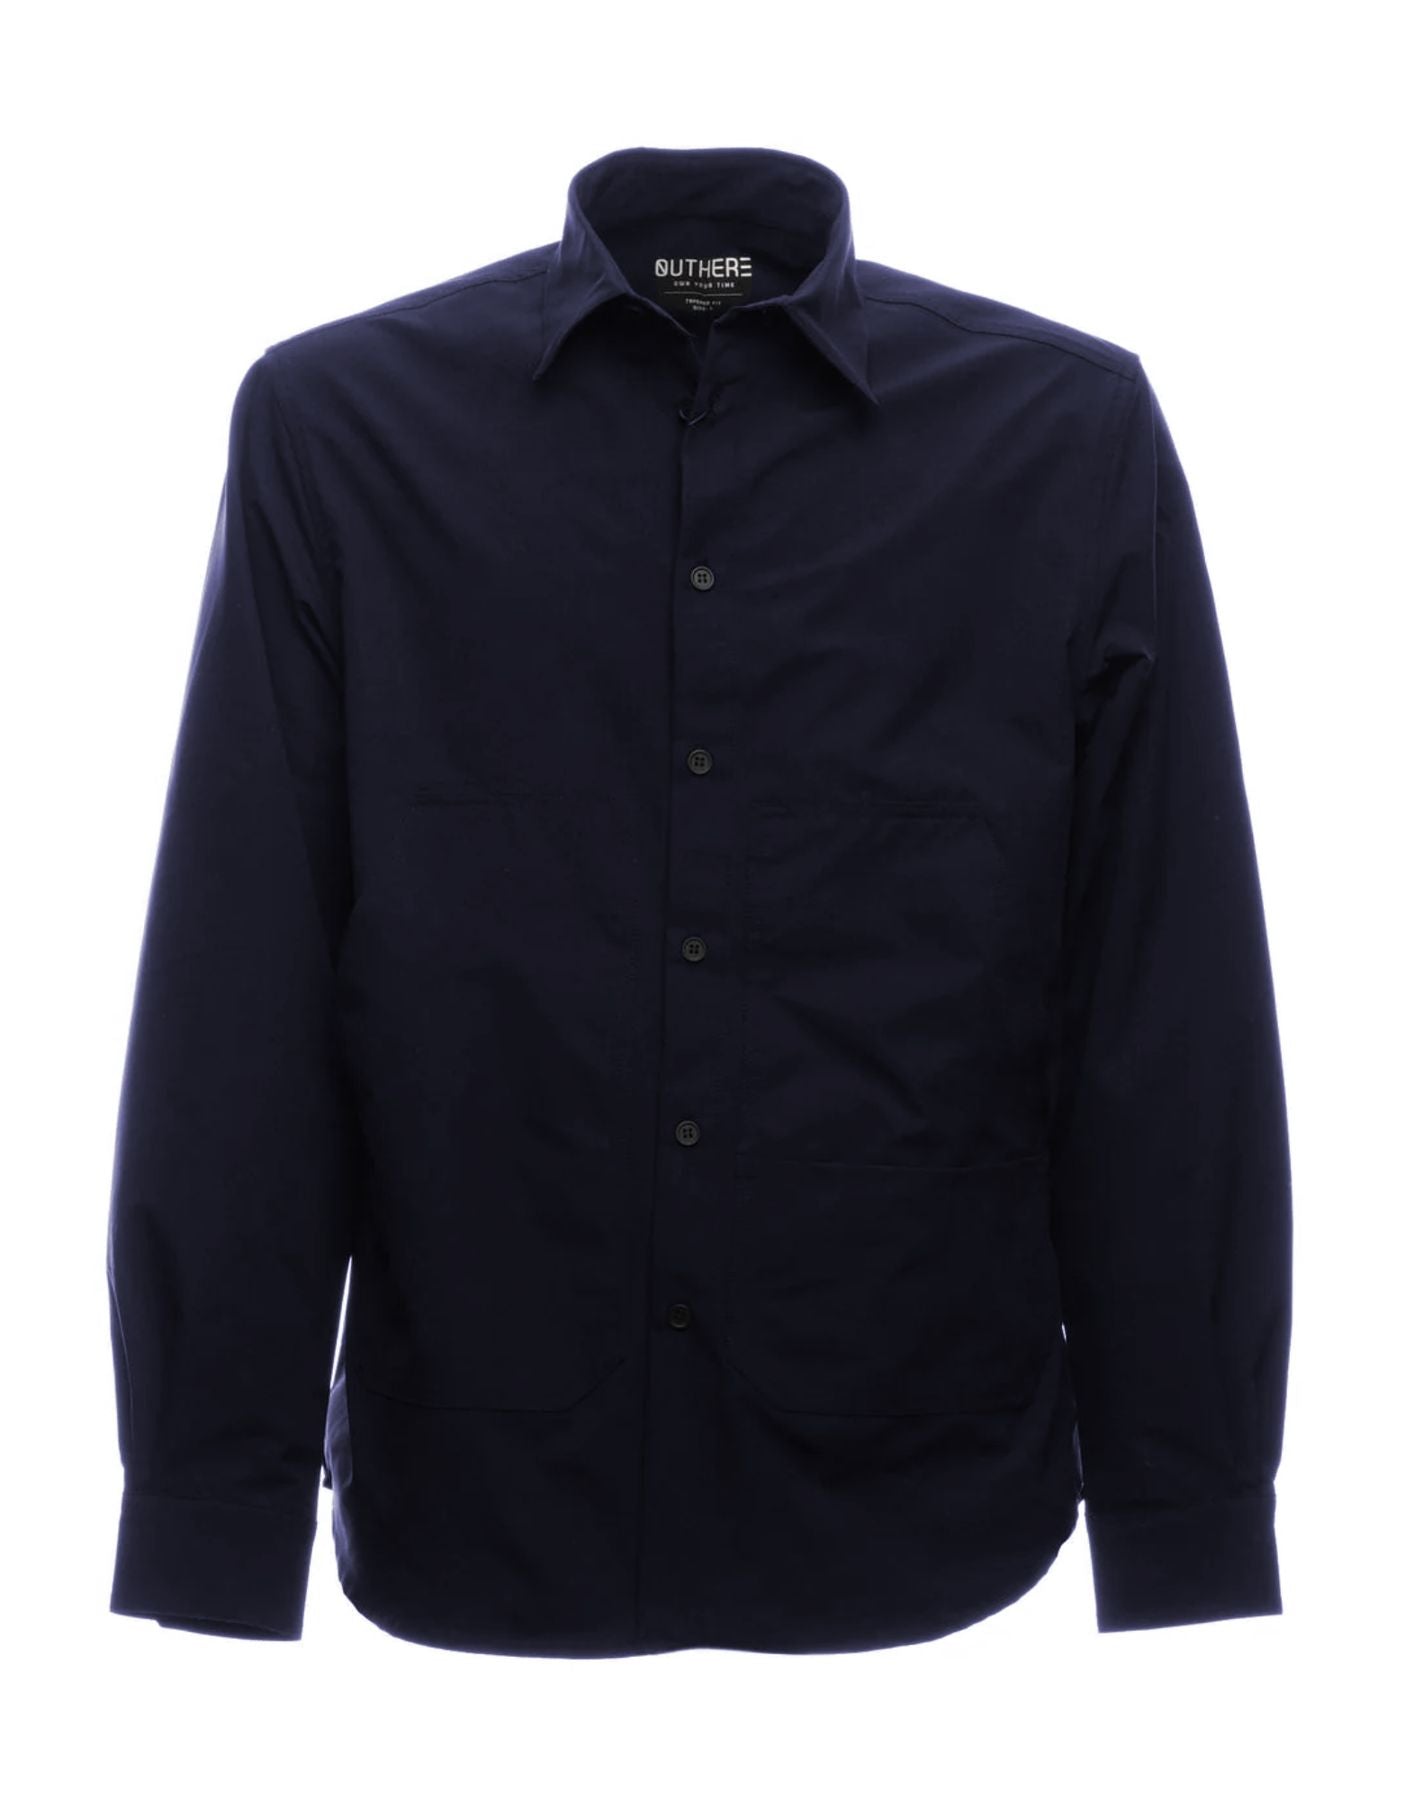 Chemise pour l'homme eotm142ag42 marine OUTHERE